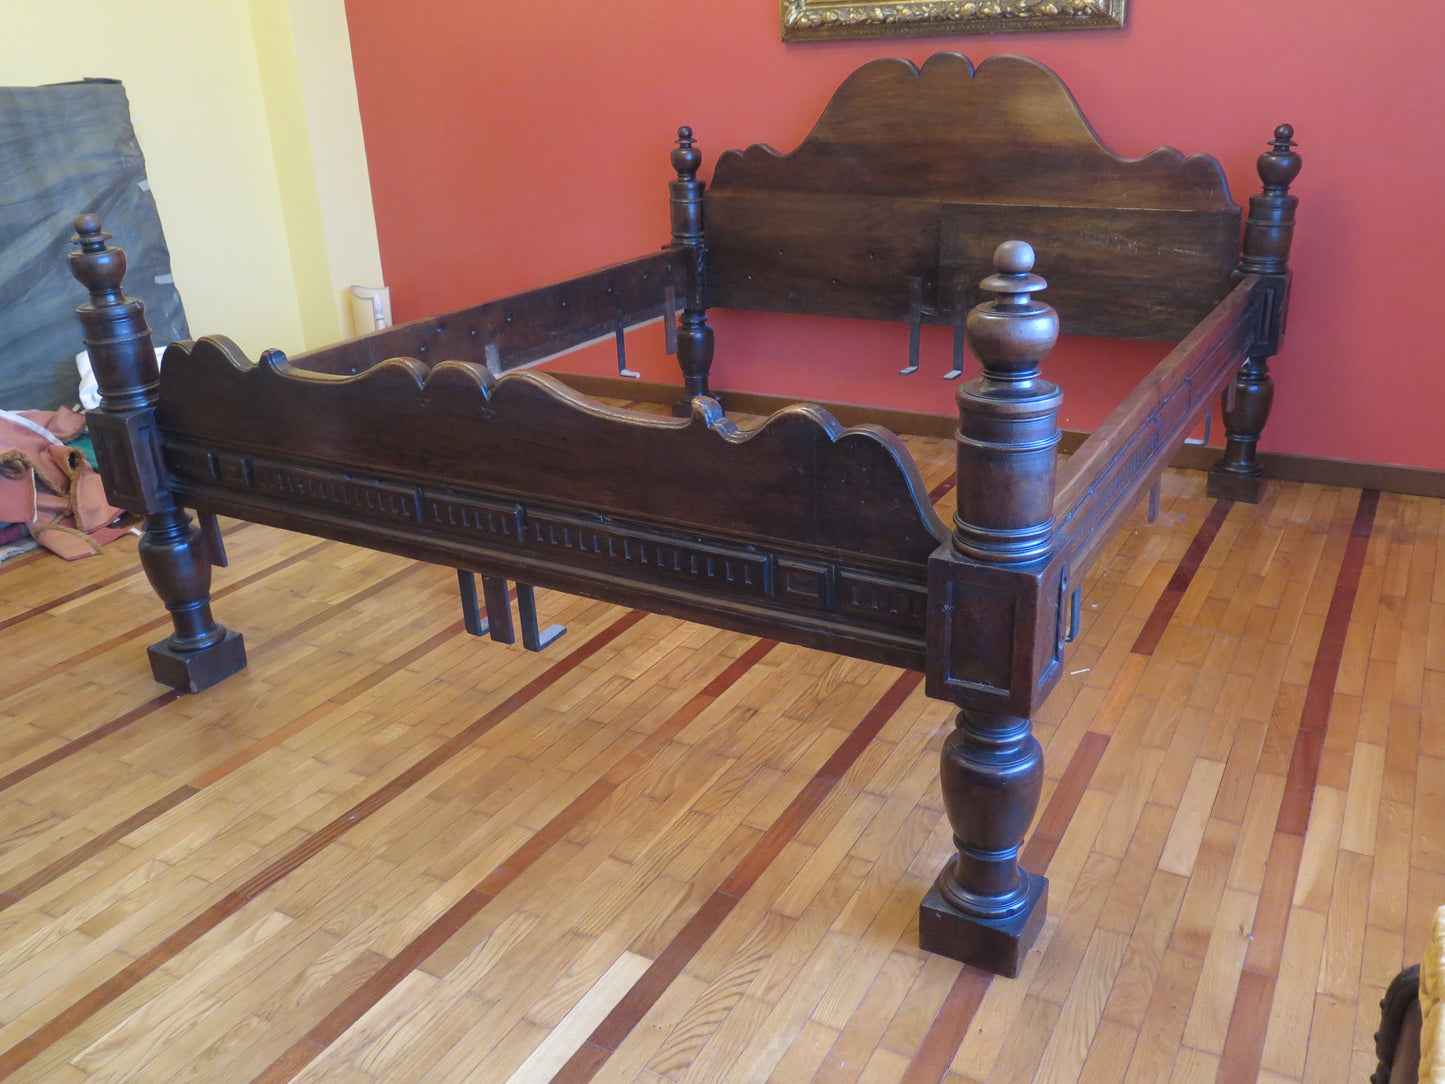 Large antique castle double bed in baroque style vs